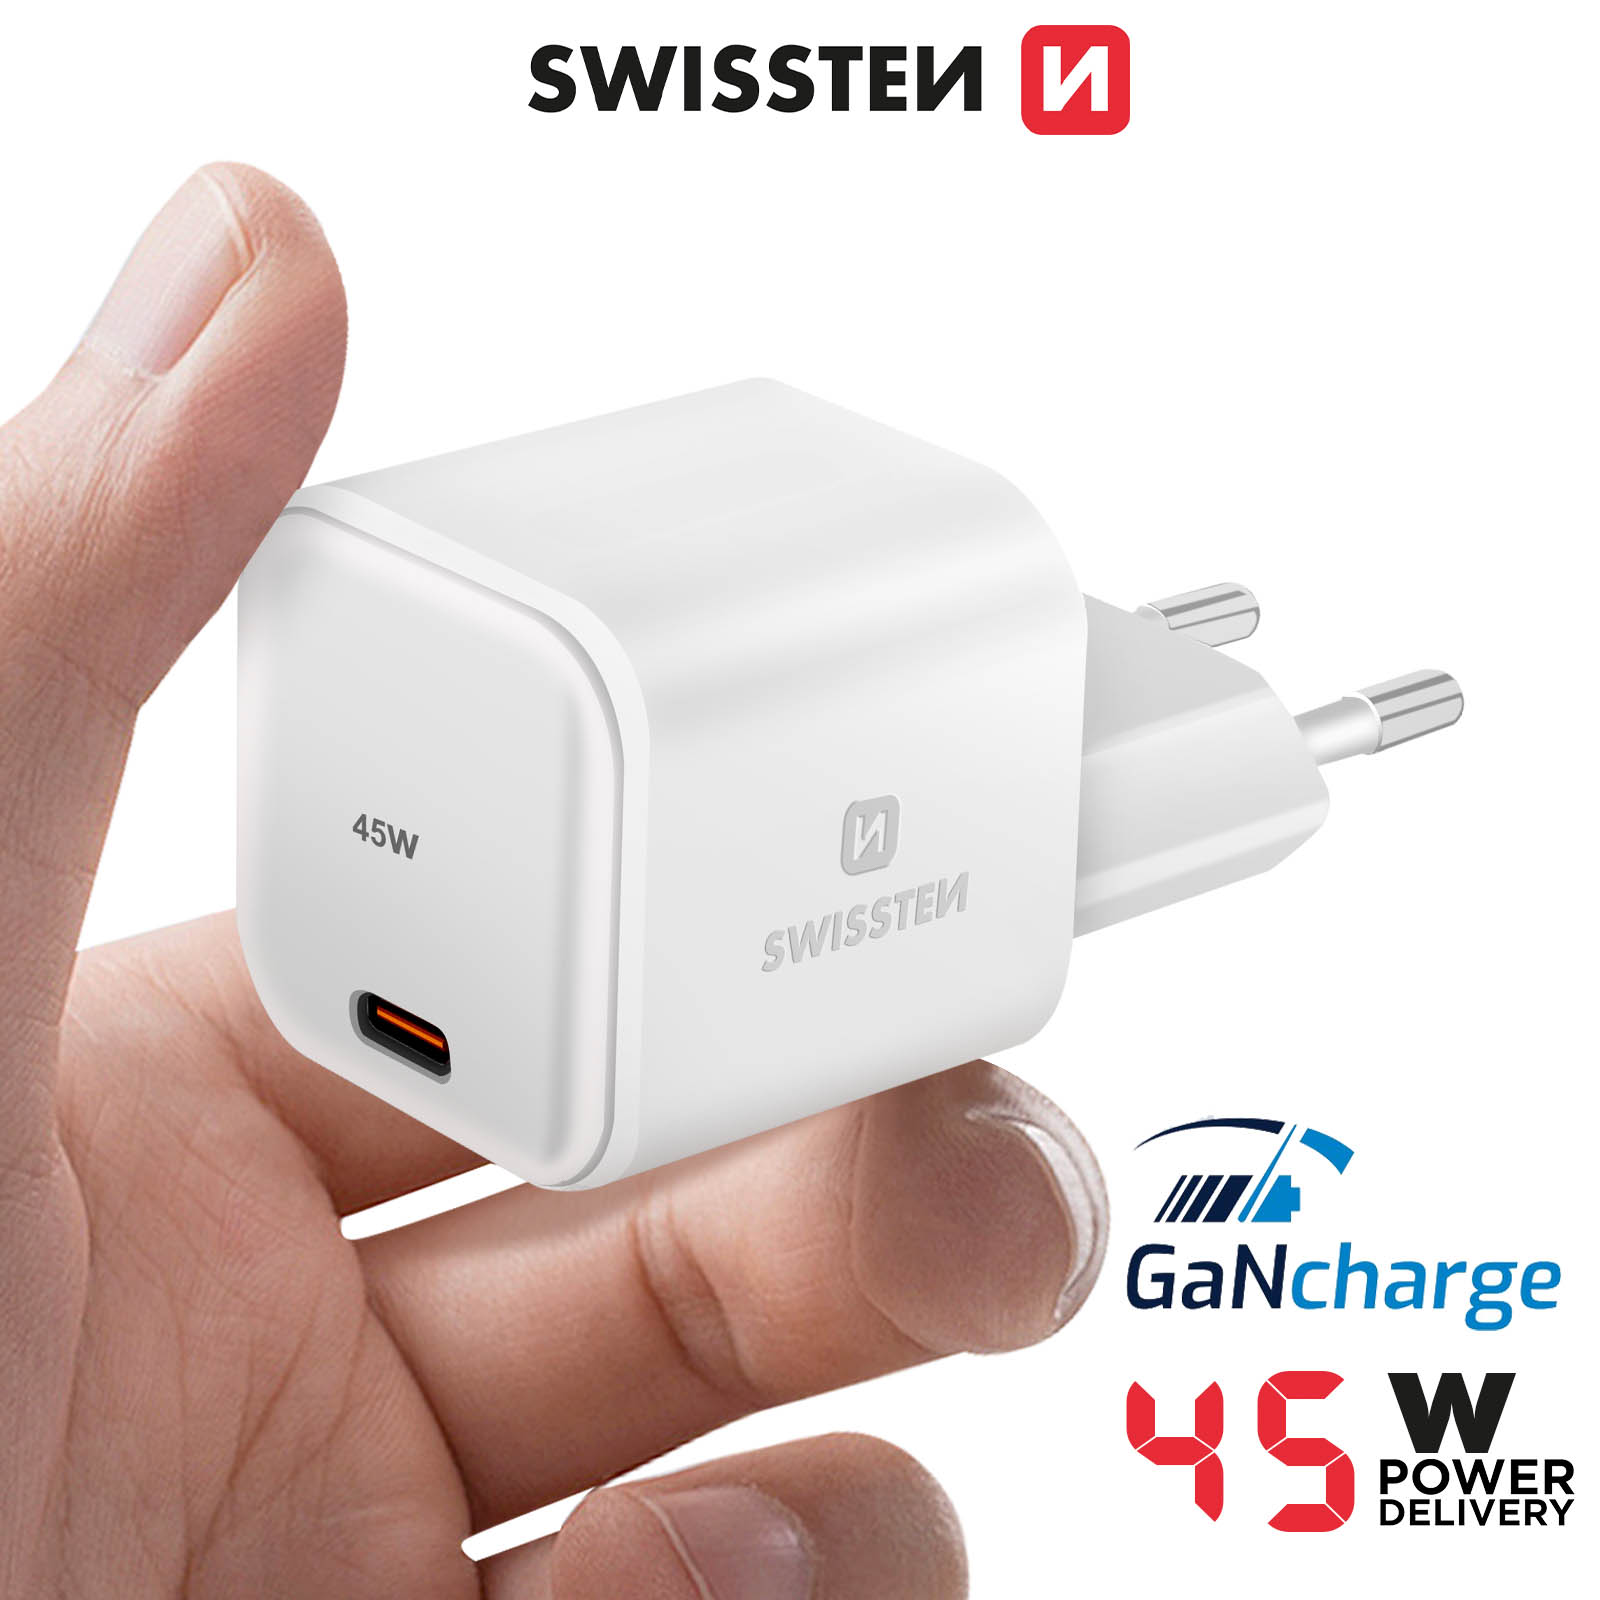 Chargeurs pour Samsung Galaxy Tab A 8.0 2019